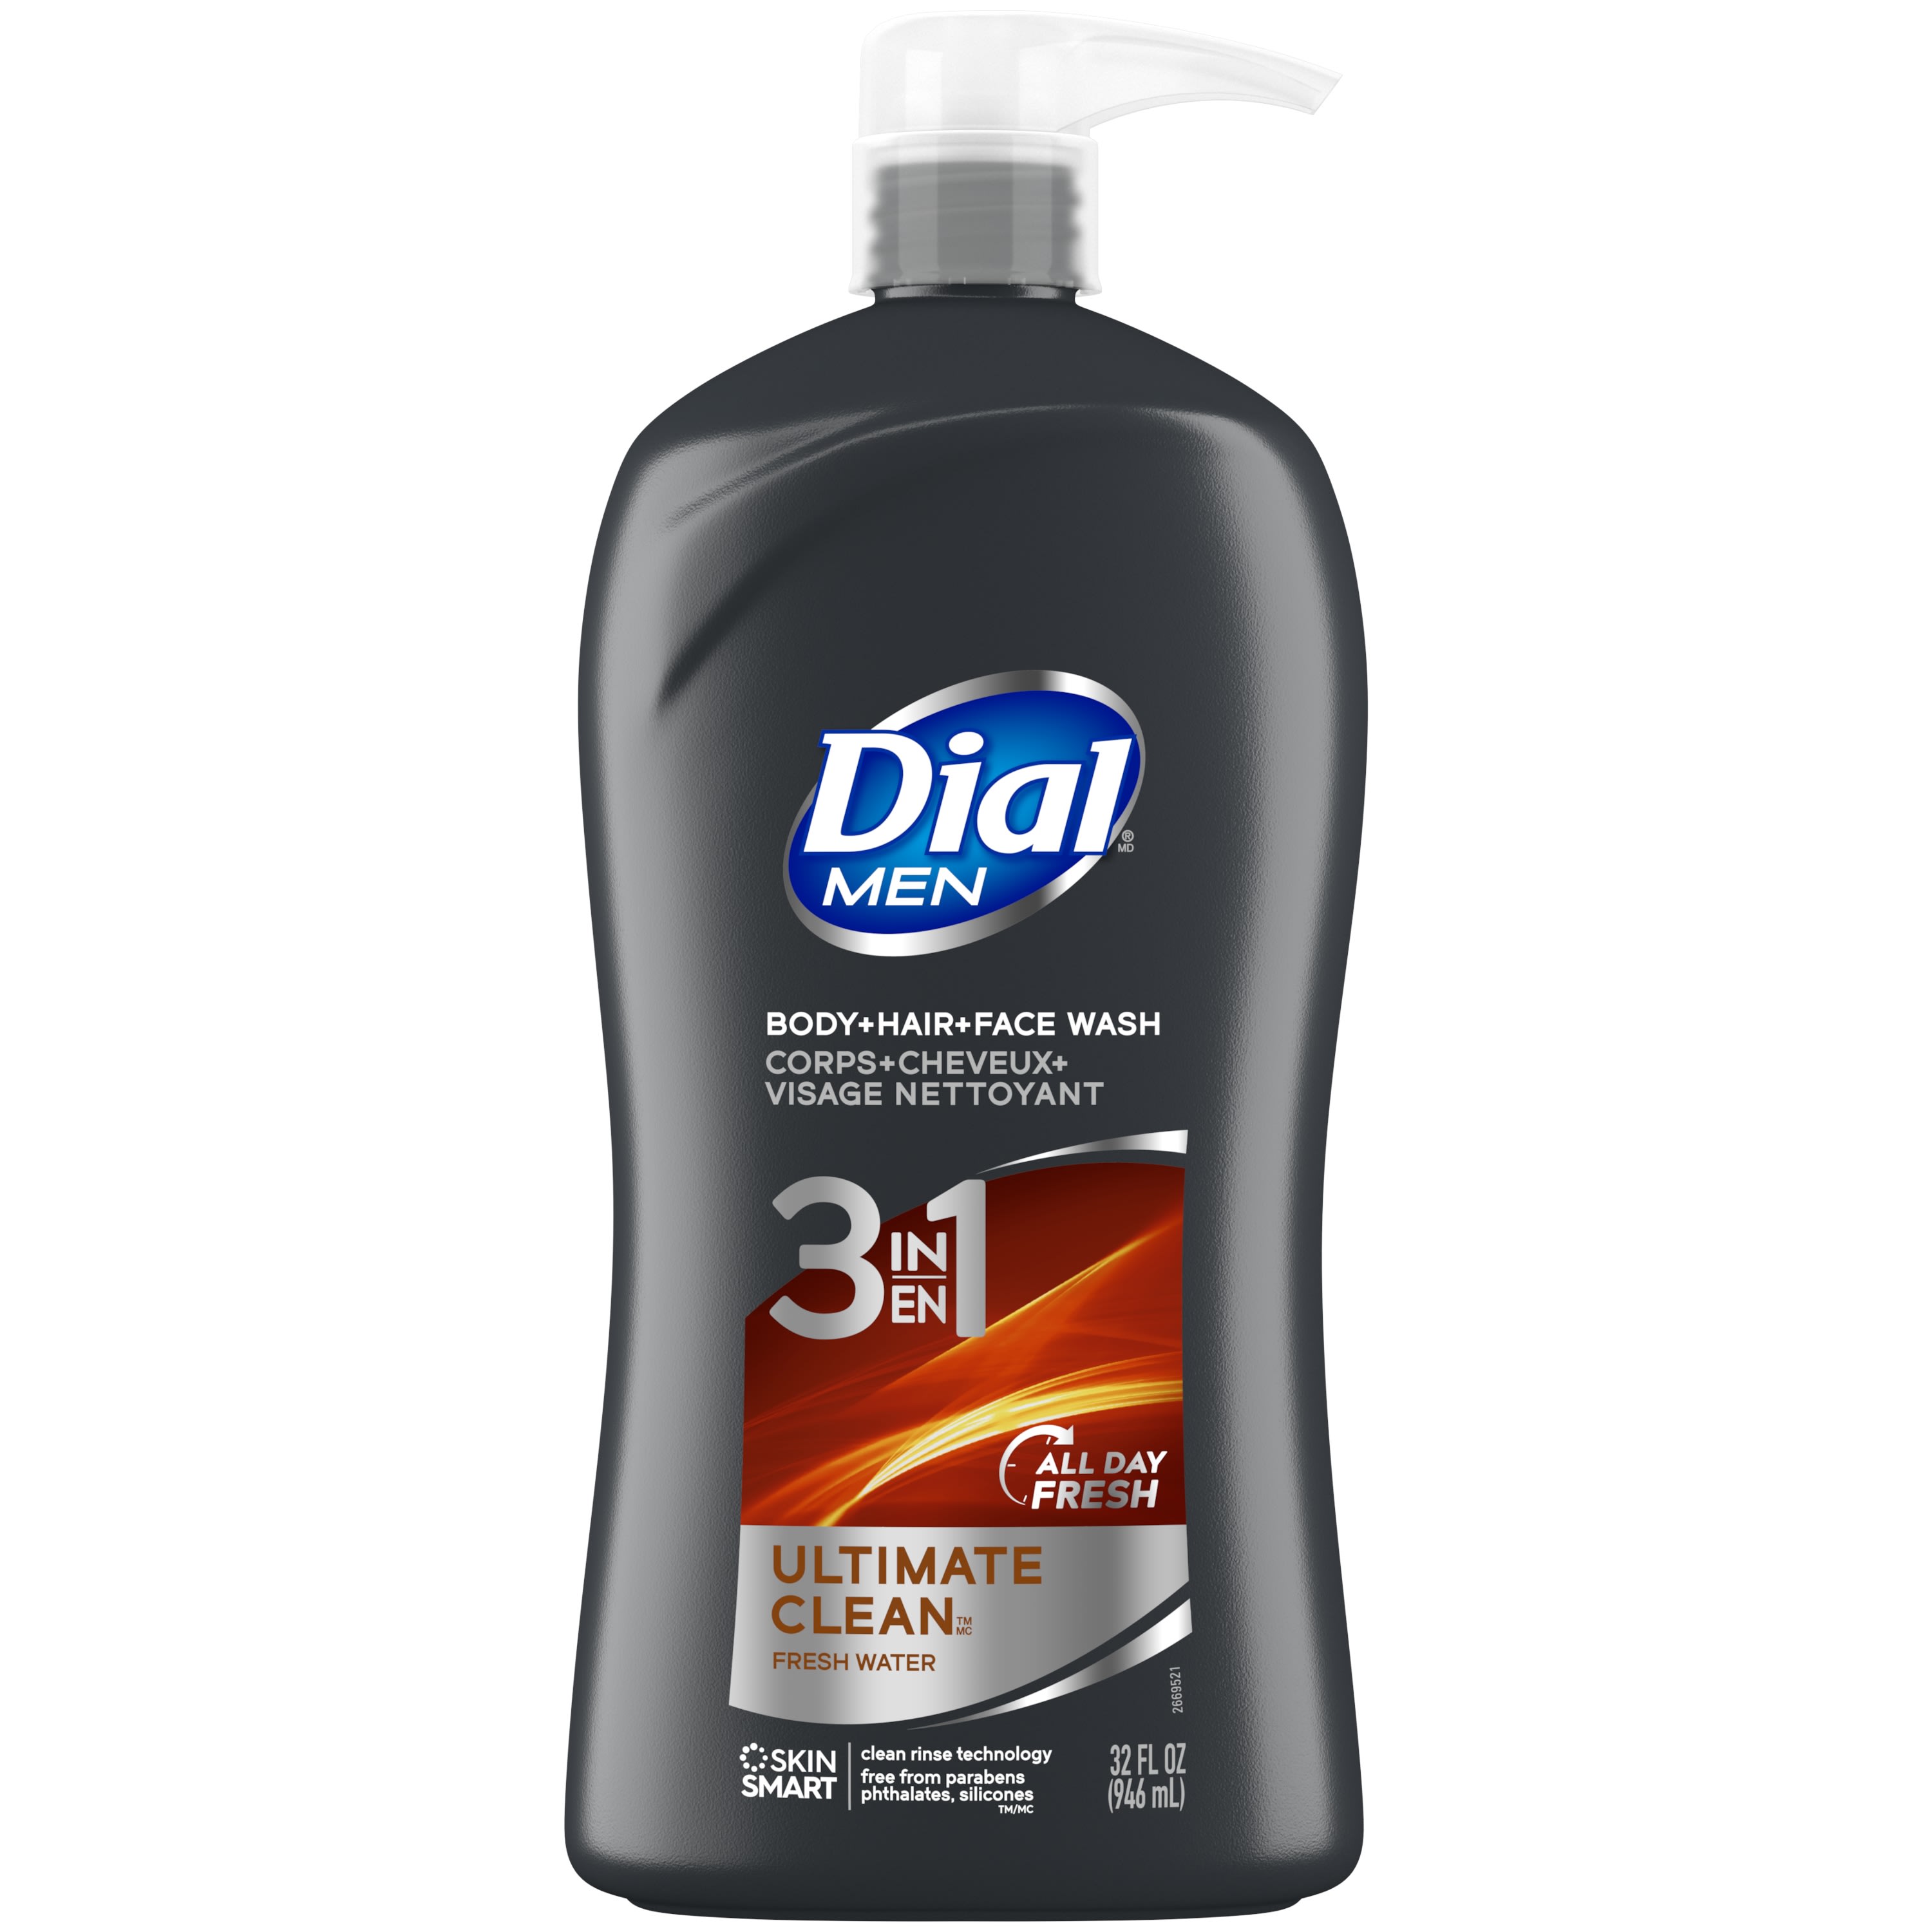 Dial Men 3in1 Body, Hair and Face Wash, Ultimate Clean, 32 fl oz - image 1 of 10